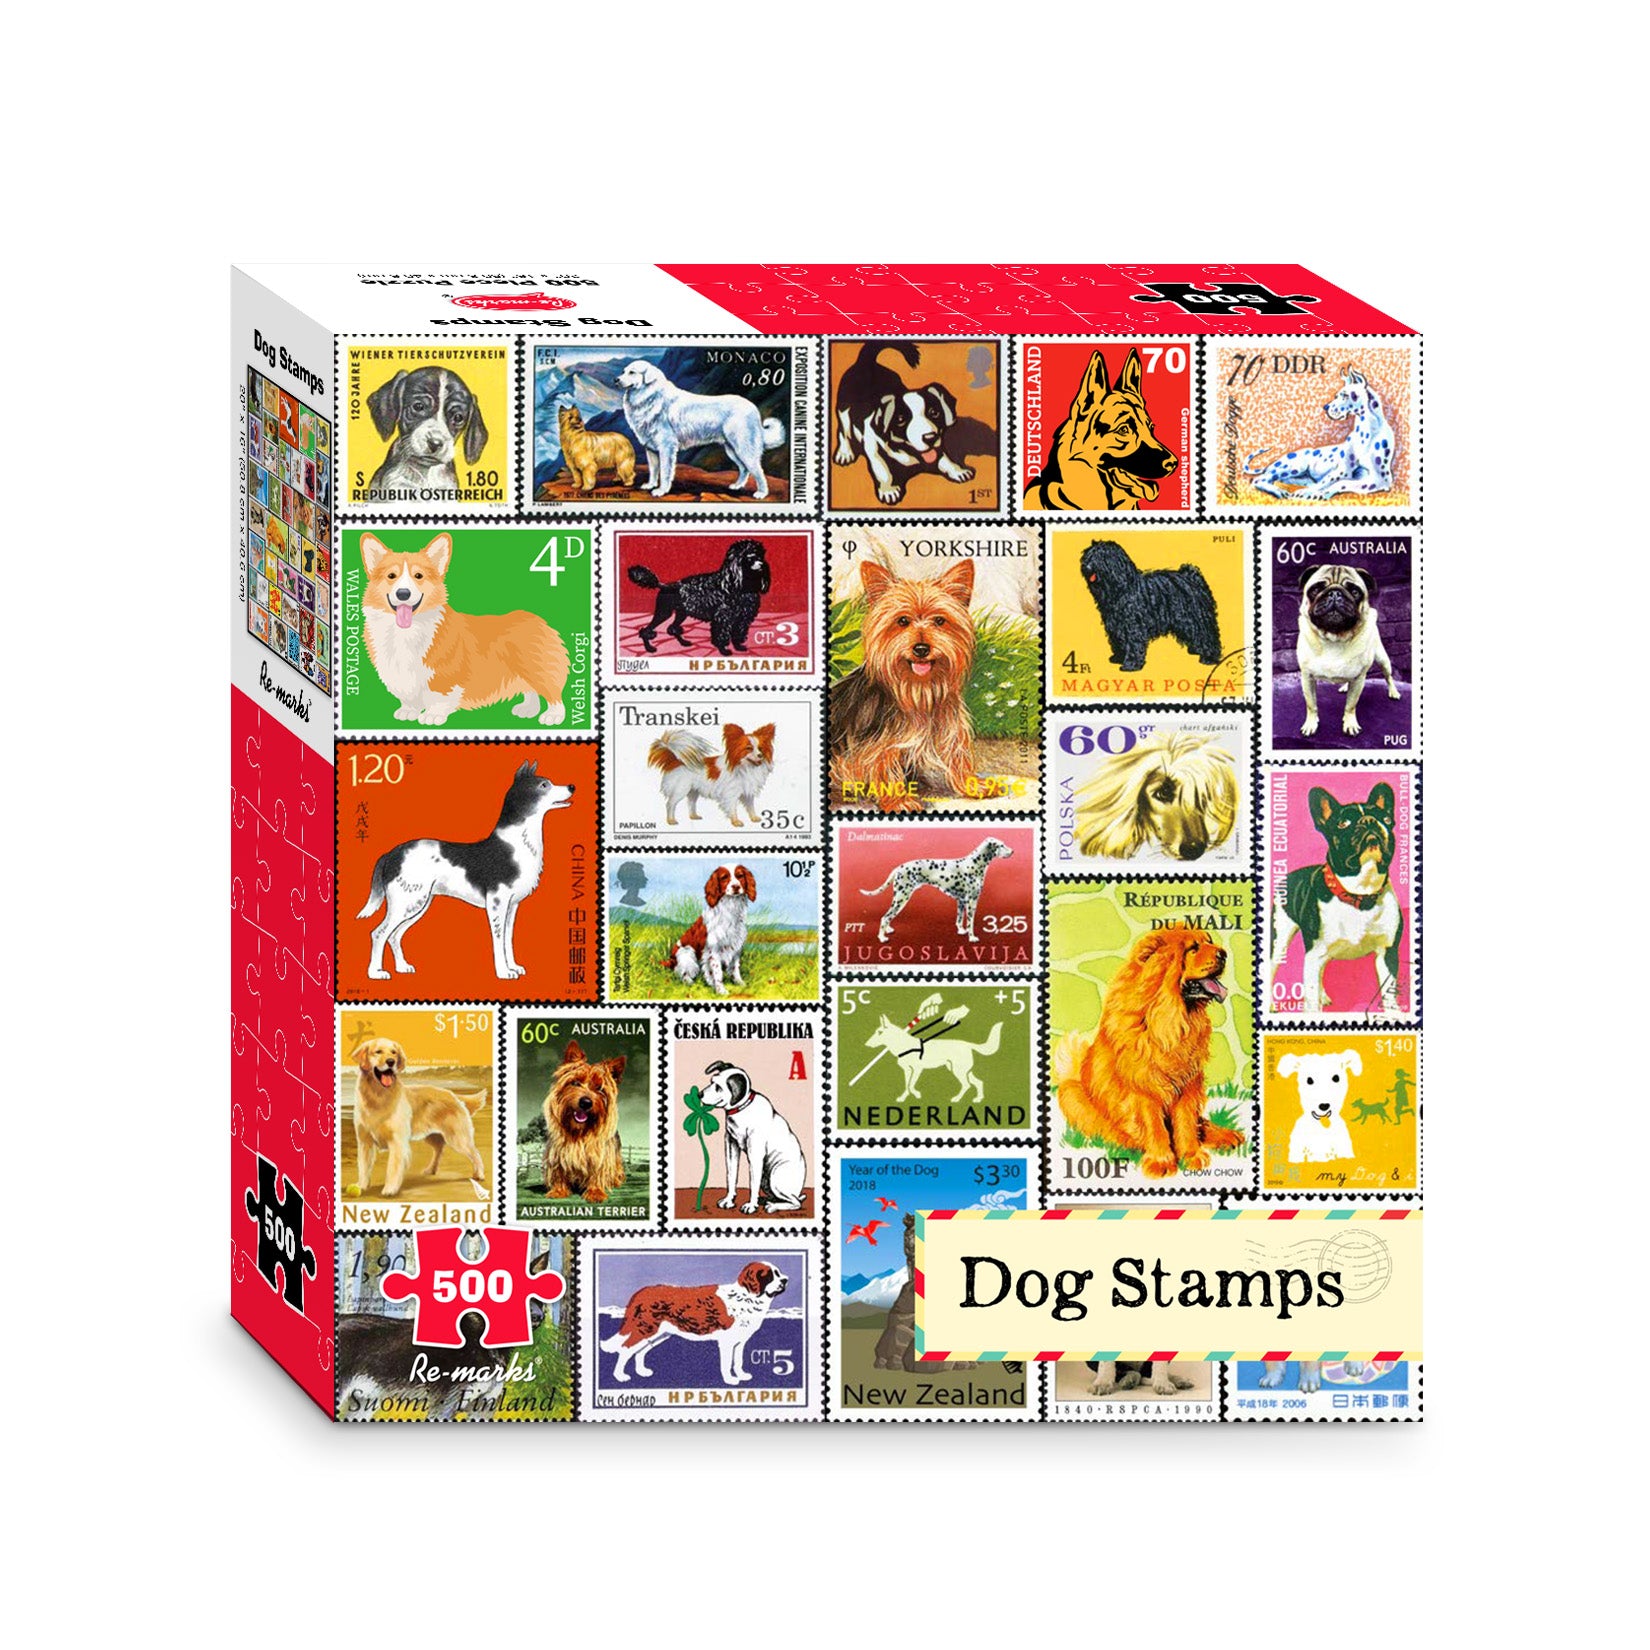 Dog Stamps Collage 500-Piece Jigsaw Puzzle – Re-marks, Inc.